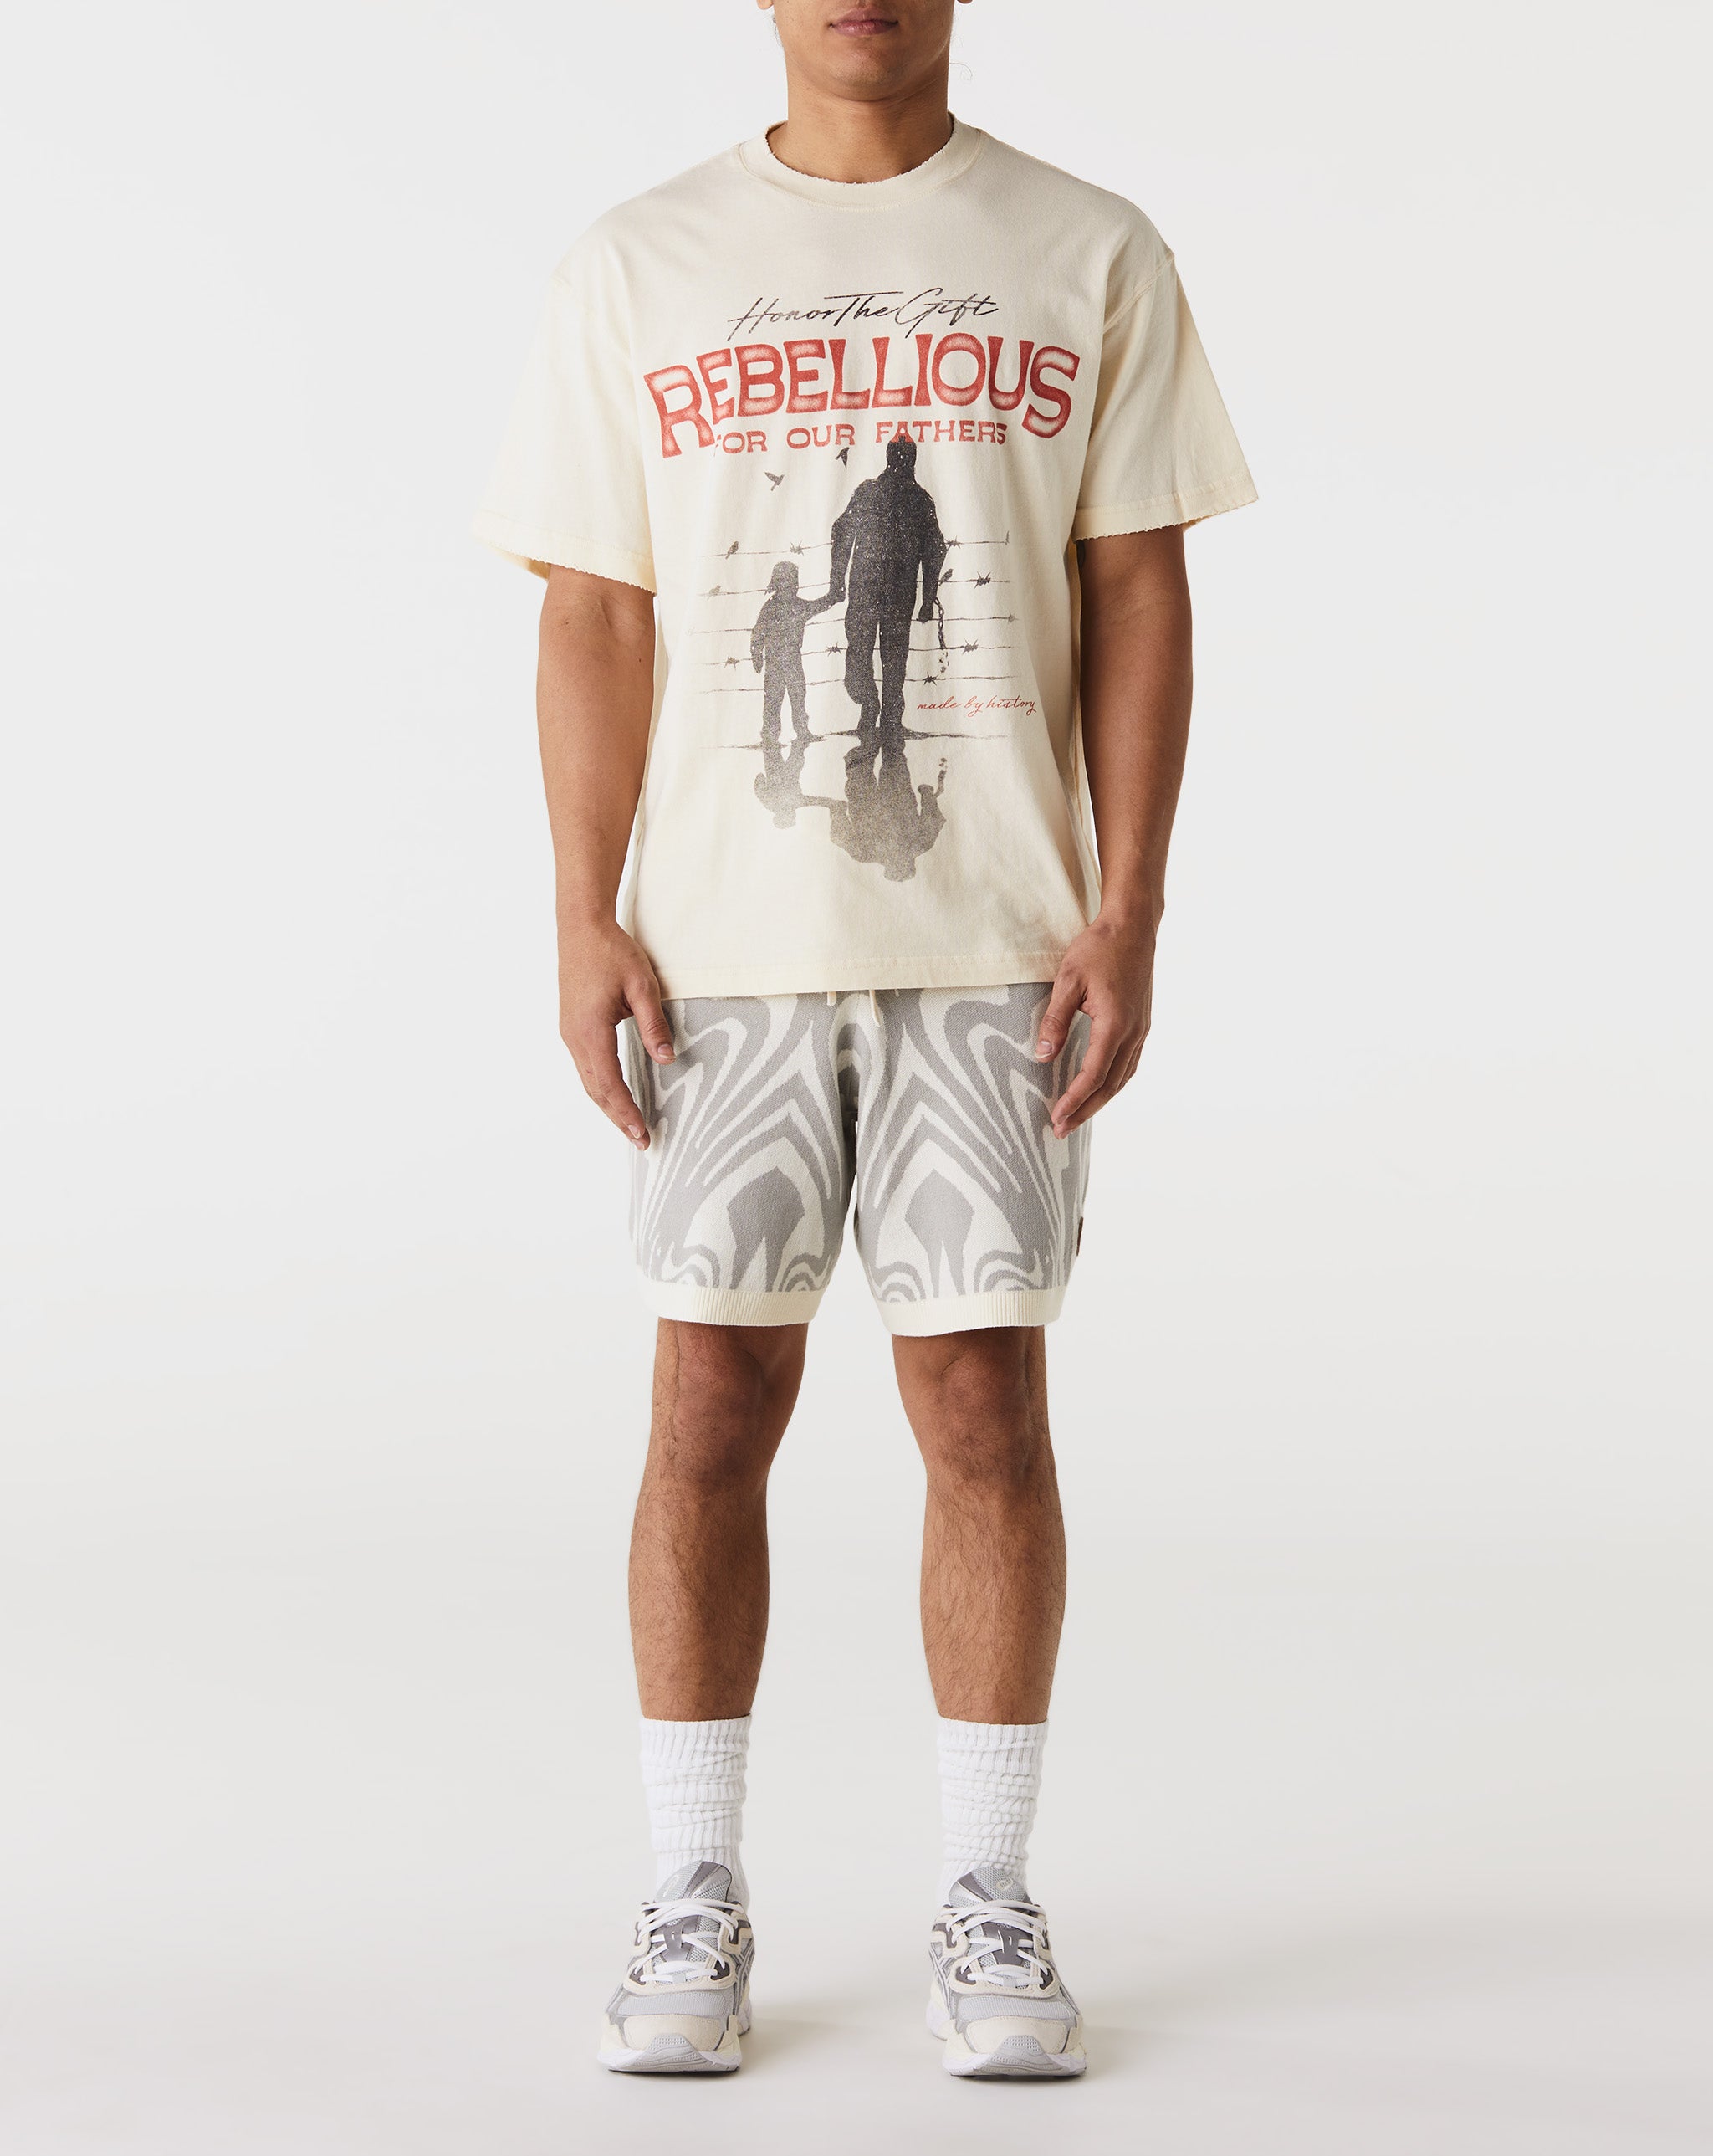 Honor The Gift Rebellious For Our Fathers T-Shirt - Rule of Next Apparel